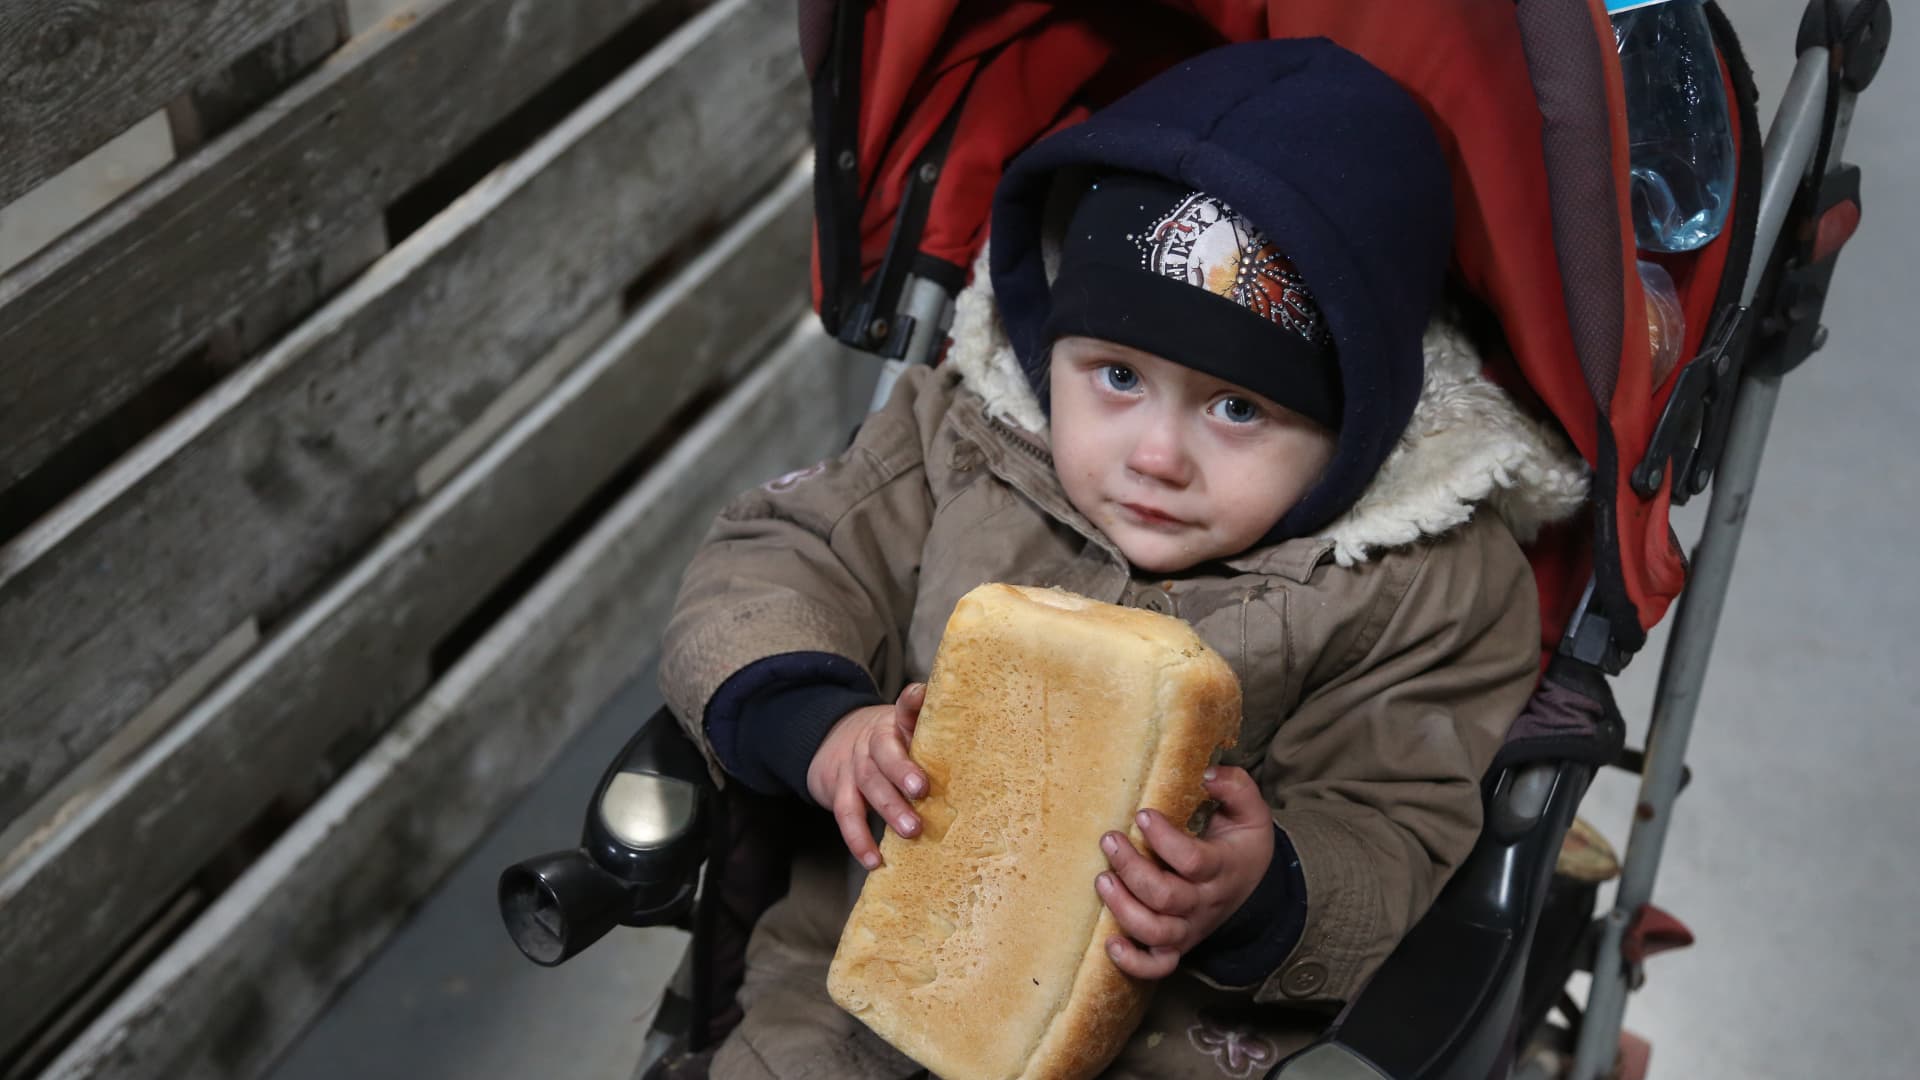 A child holds a bread as civilians are being evacuated along humanitarian corridors from the Ukrainian city of Mariupol under the control of Russian military and pro-Russian separatists, on March 24, 2022.